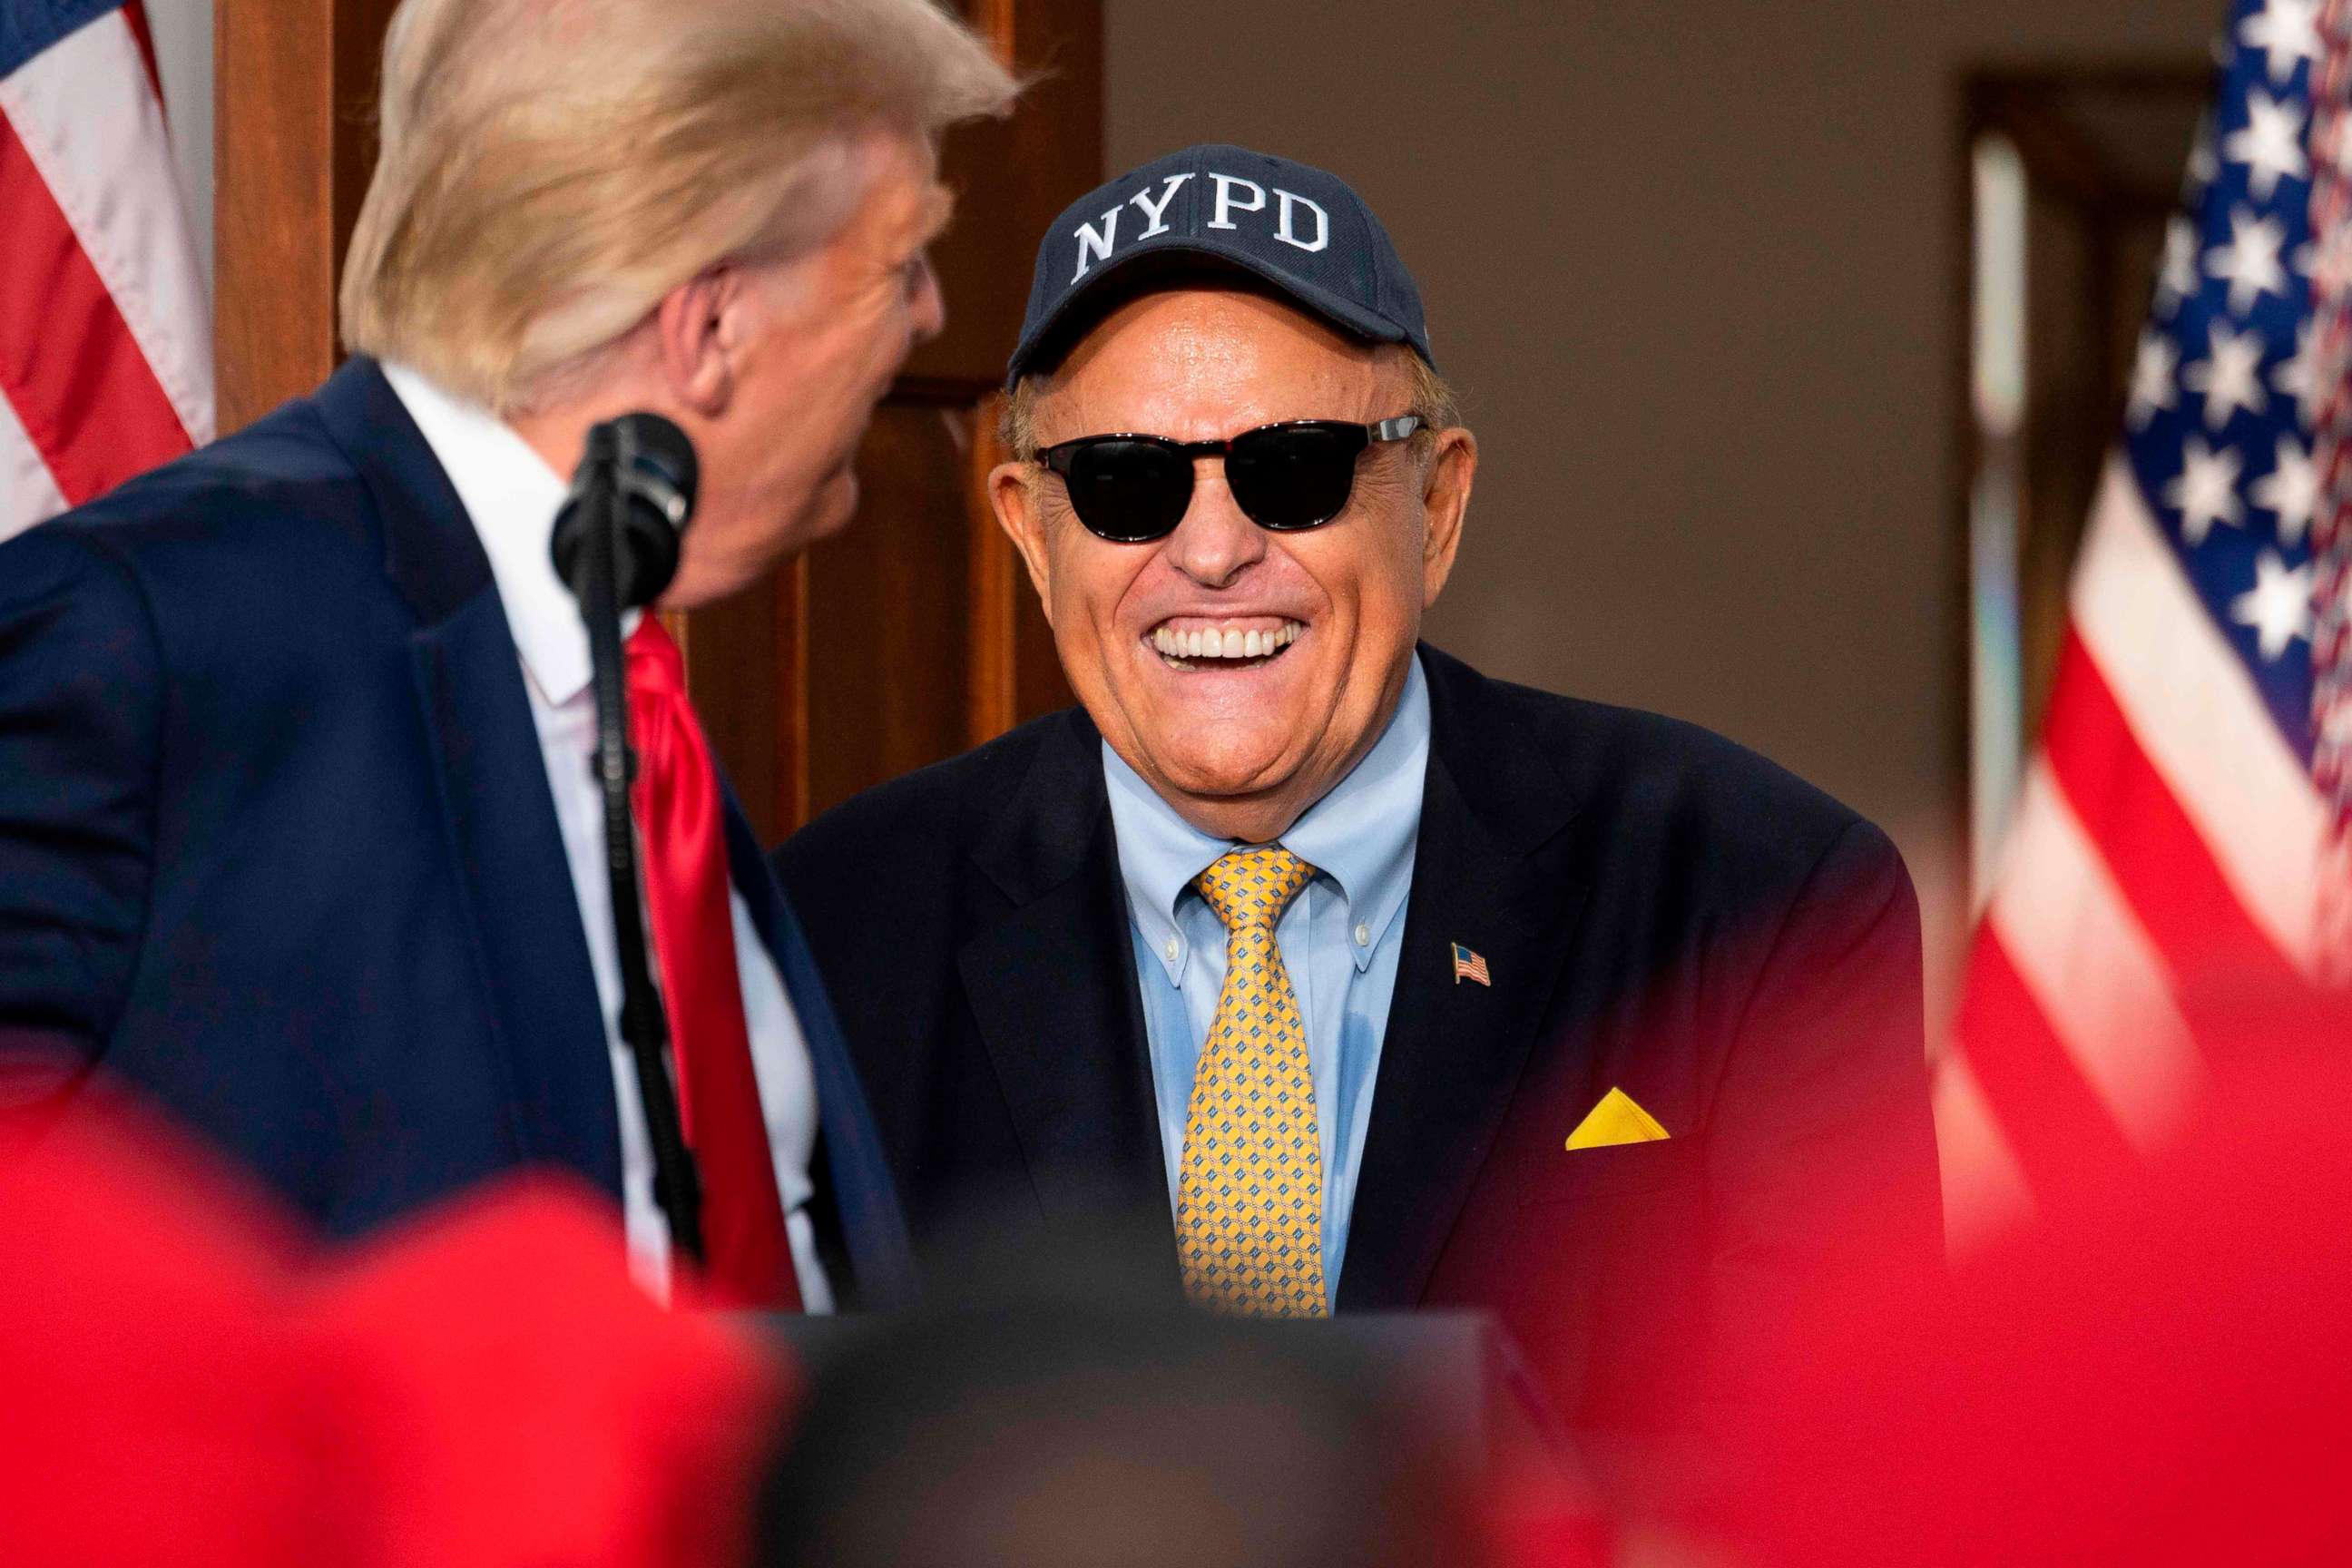 PHOTO: President Donald Trump's personal lawyer Rudy Giuliani smiles to Trump after he delivers remarks to the City of New York Police Benevolent Association at the Trump National Golf Club in Bedminster, N.J., on Aug. 14, 2020.